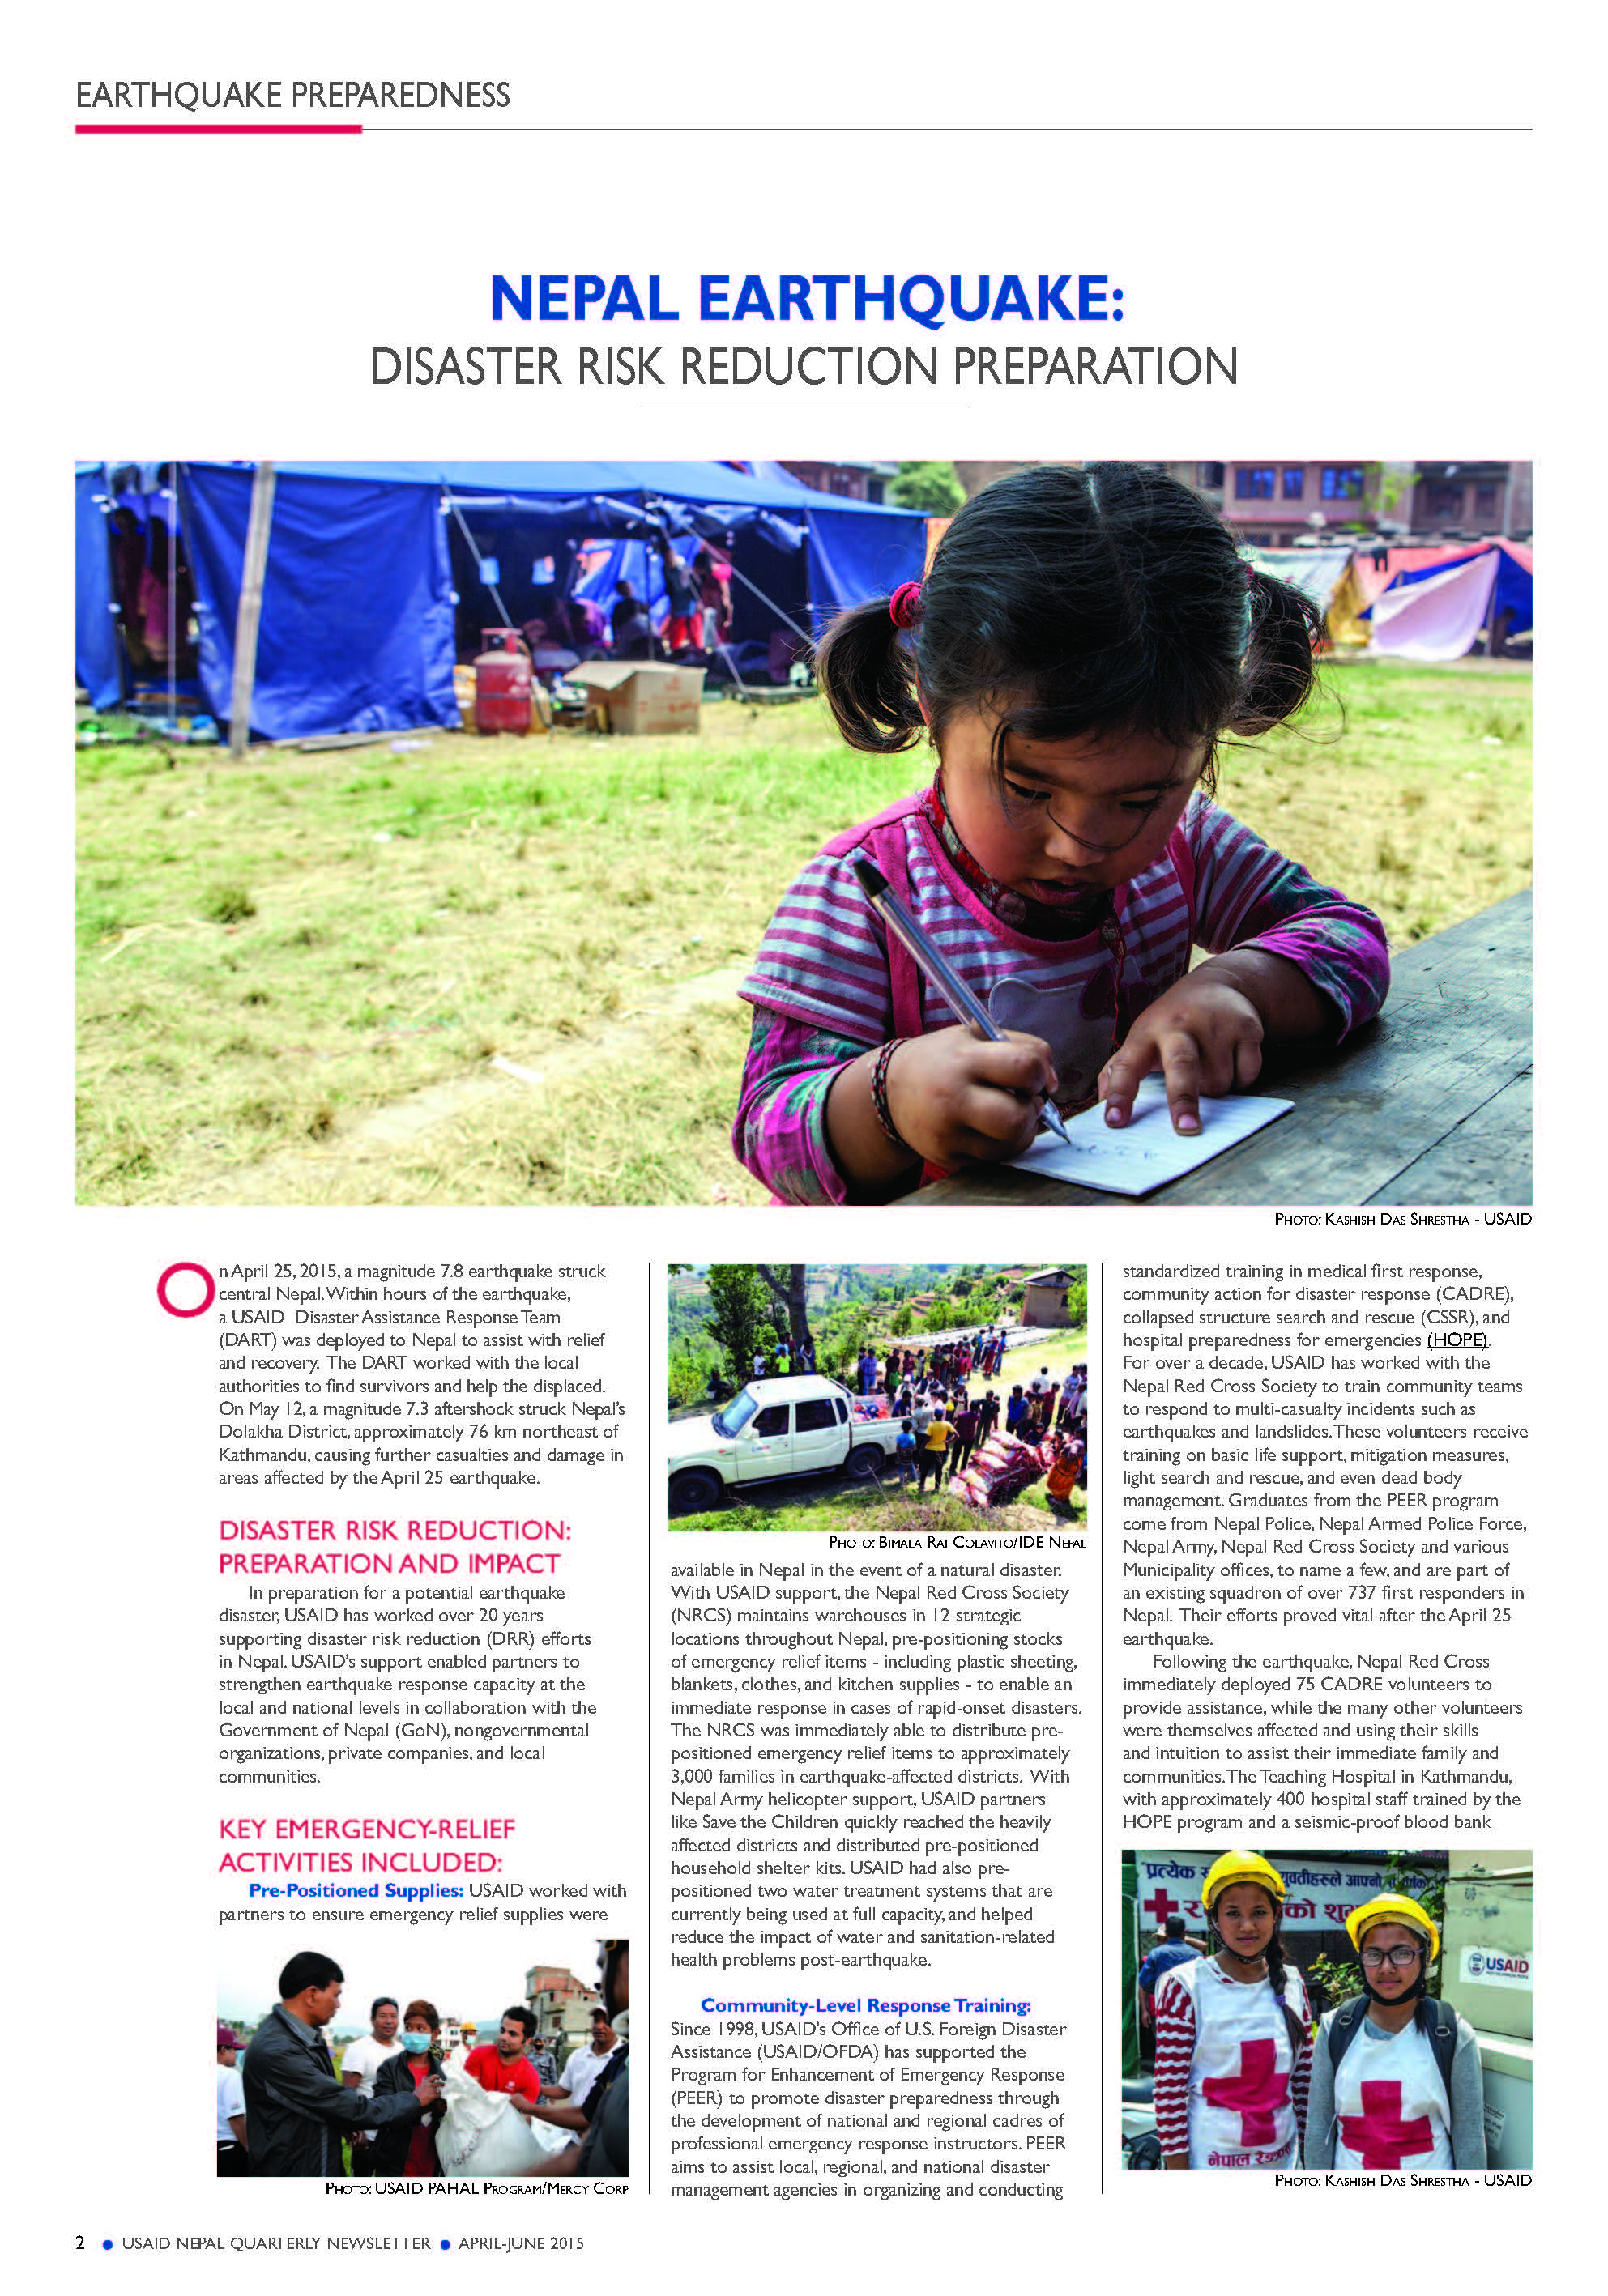 NEPAL EARTHQUAKE: DISASTER RISK REDUCTION PREPARATION